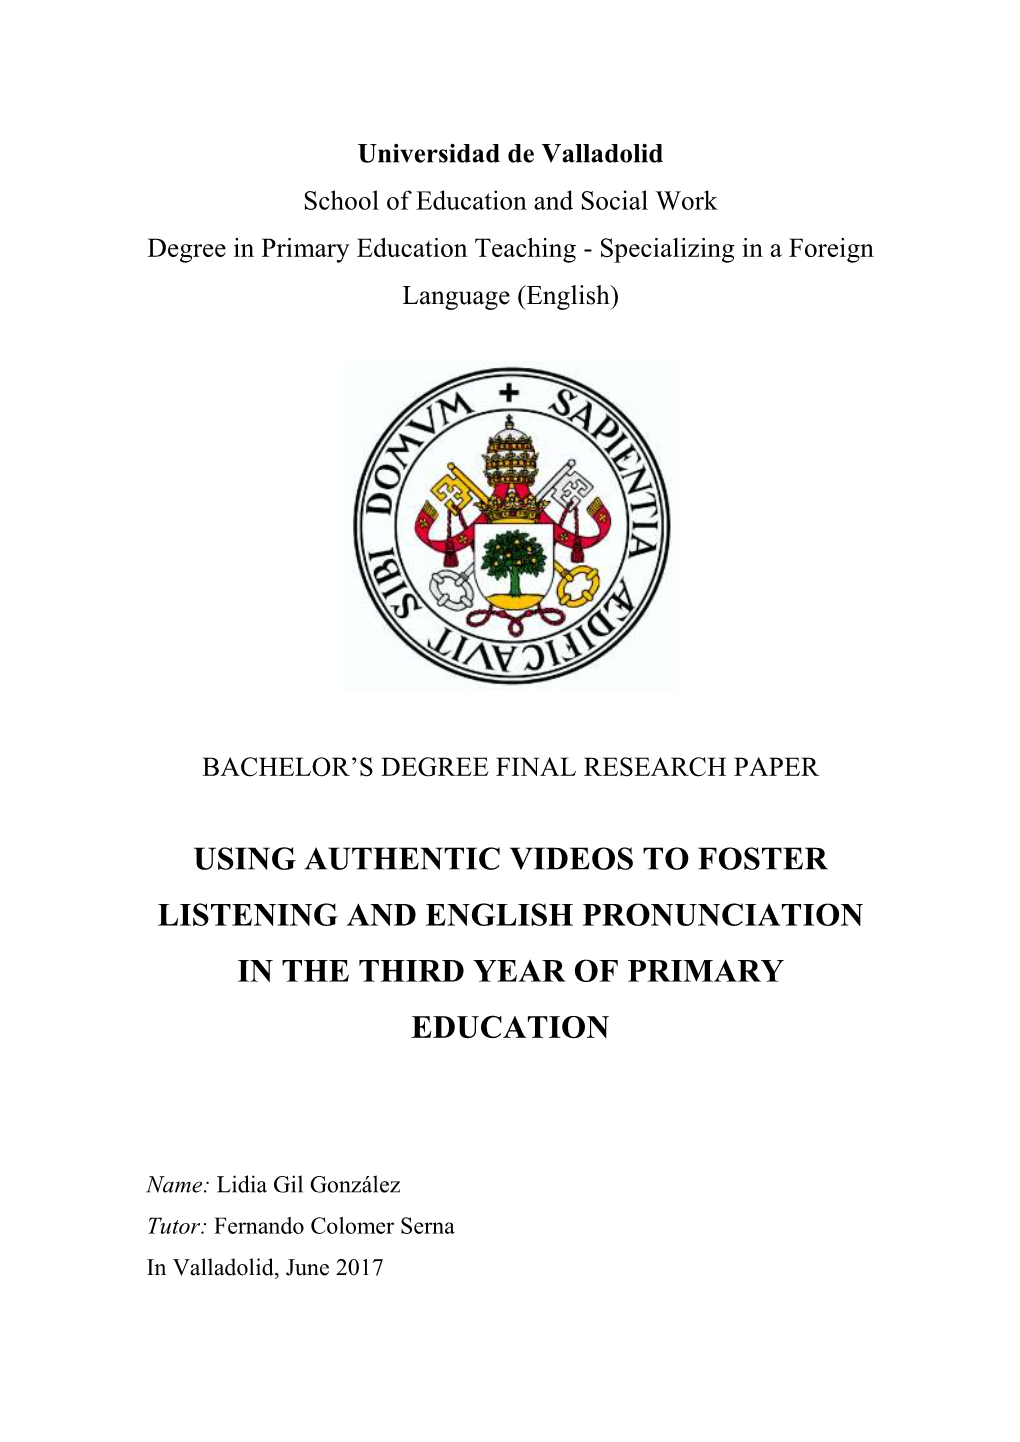 Using Authentic Videos to Foster Listening and English Pronunciation in the Third Year of Primary Education